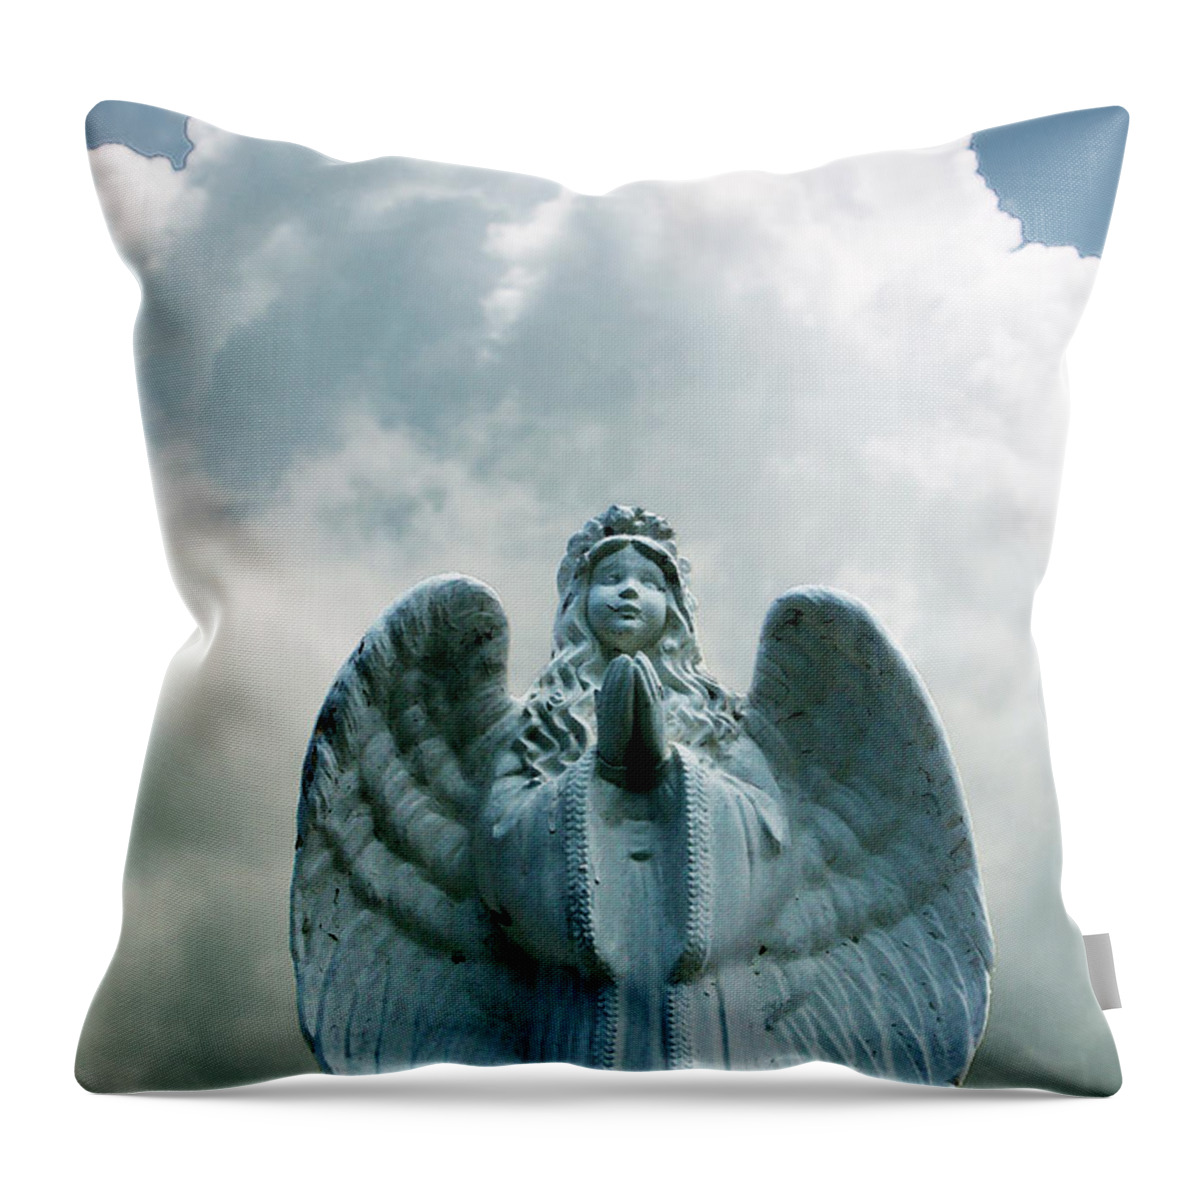 Angel Throw Pillow featuring the pyrography Key West Angel #5 by Susan Vineyard